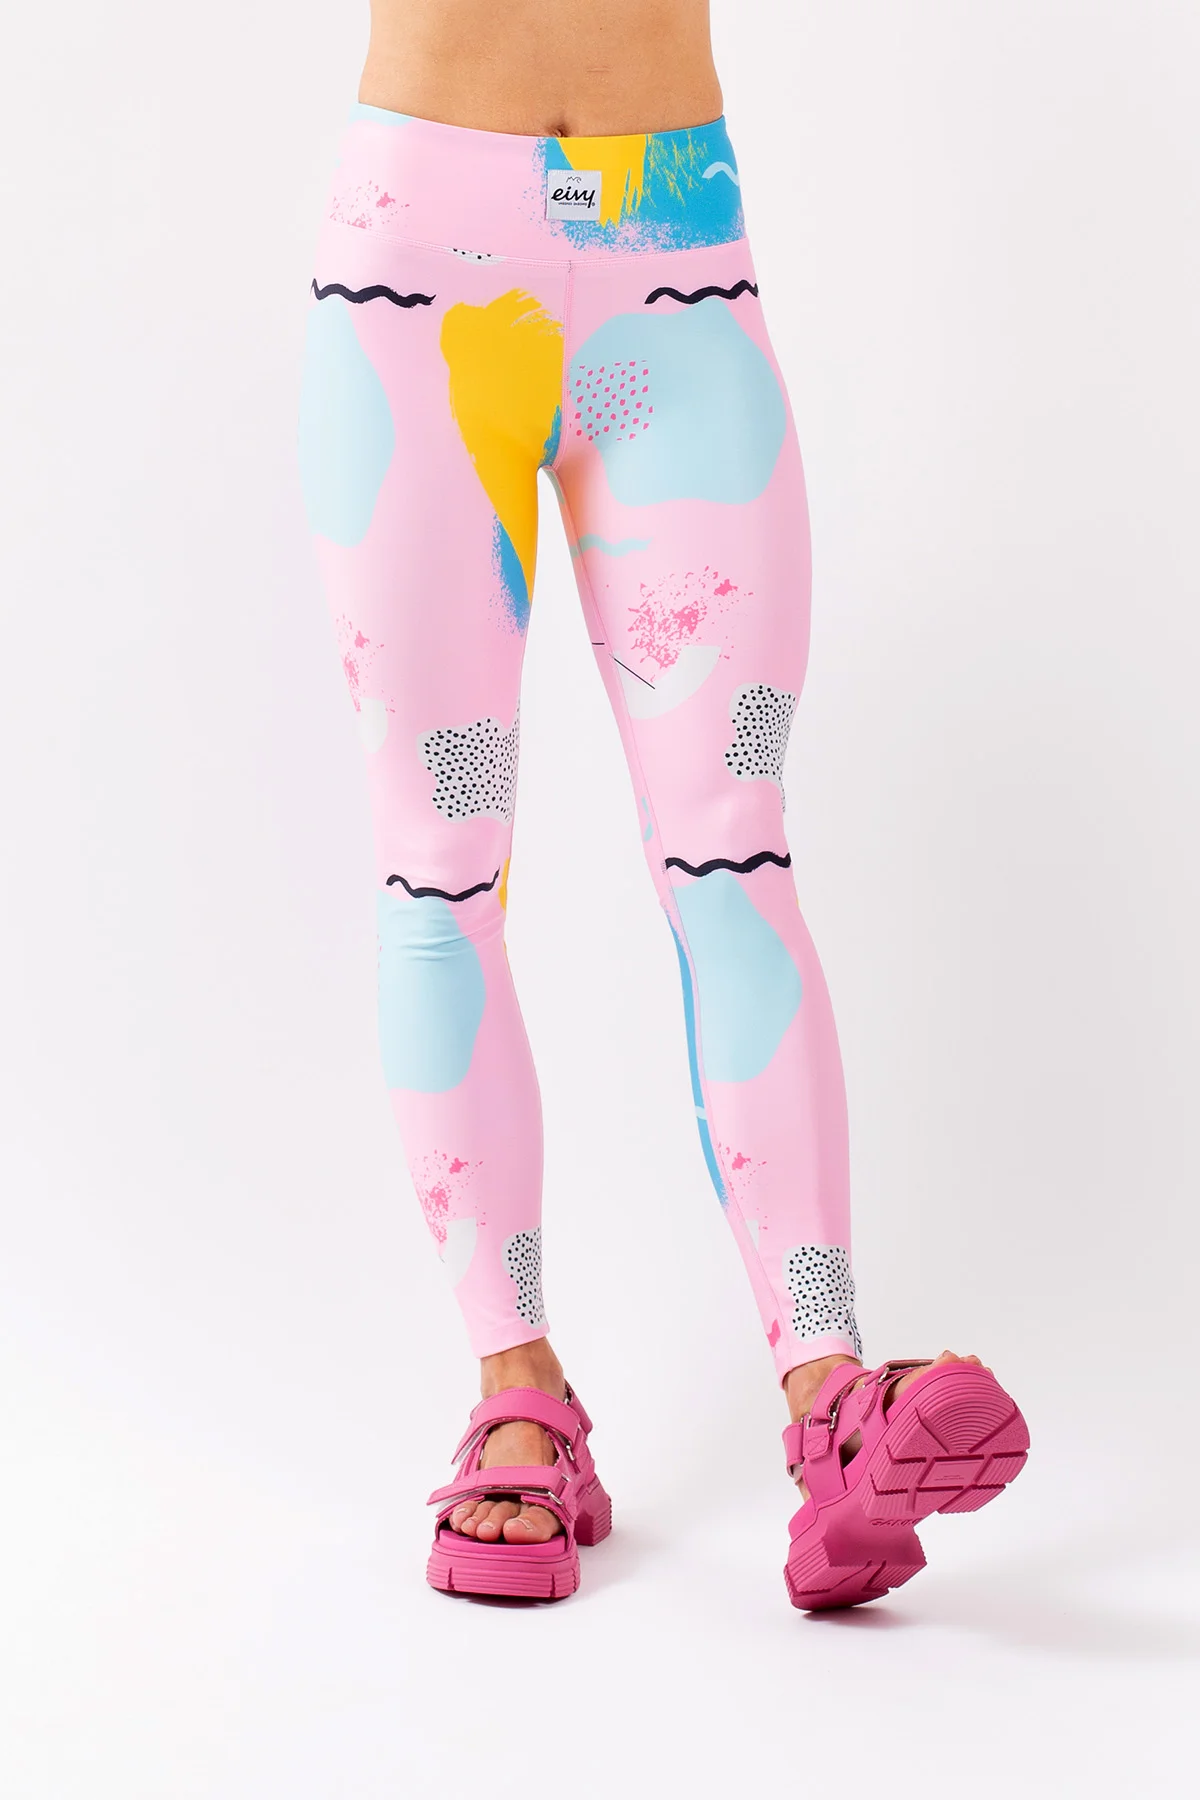 https://www.eivy.co/image/7051/base-layer-icecold-tights-certain-shapes-front-1.webp